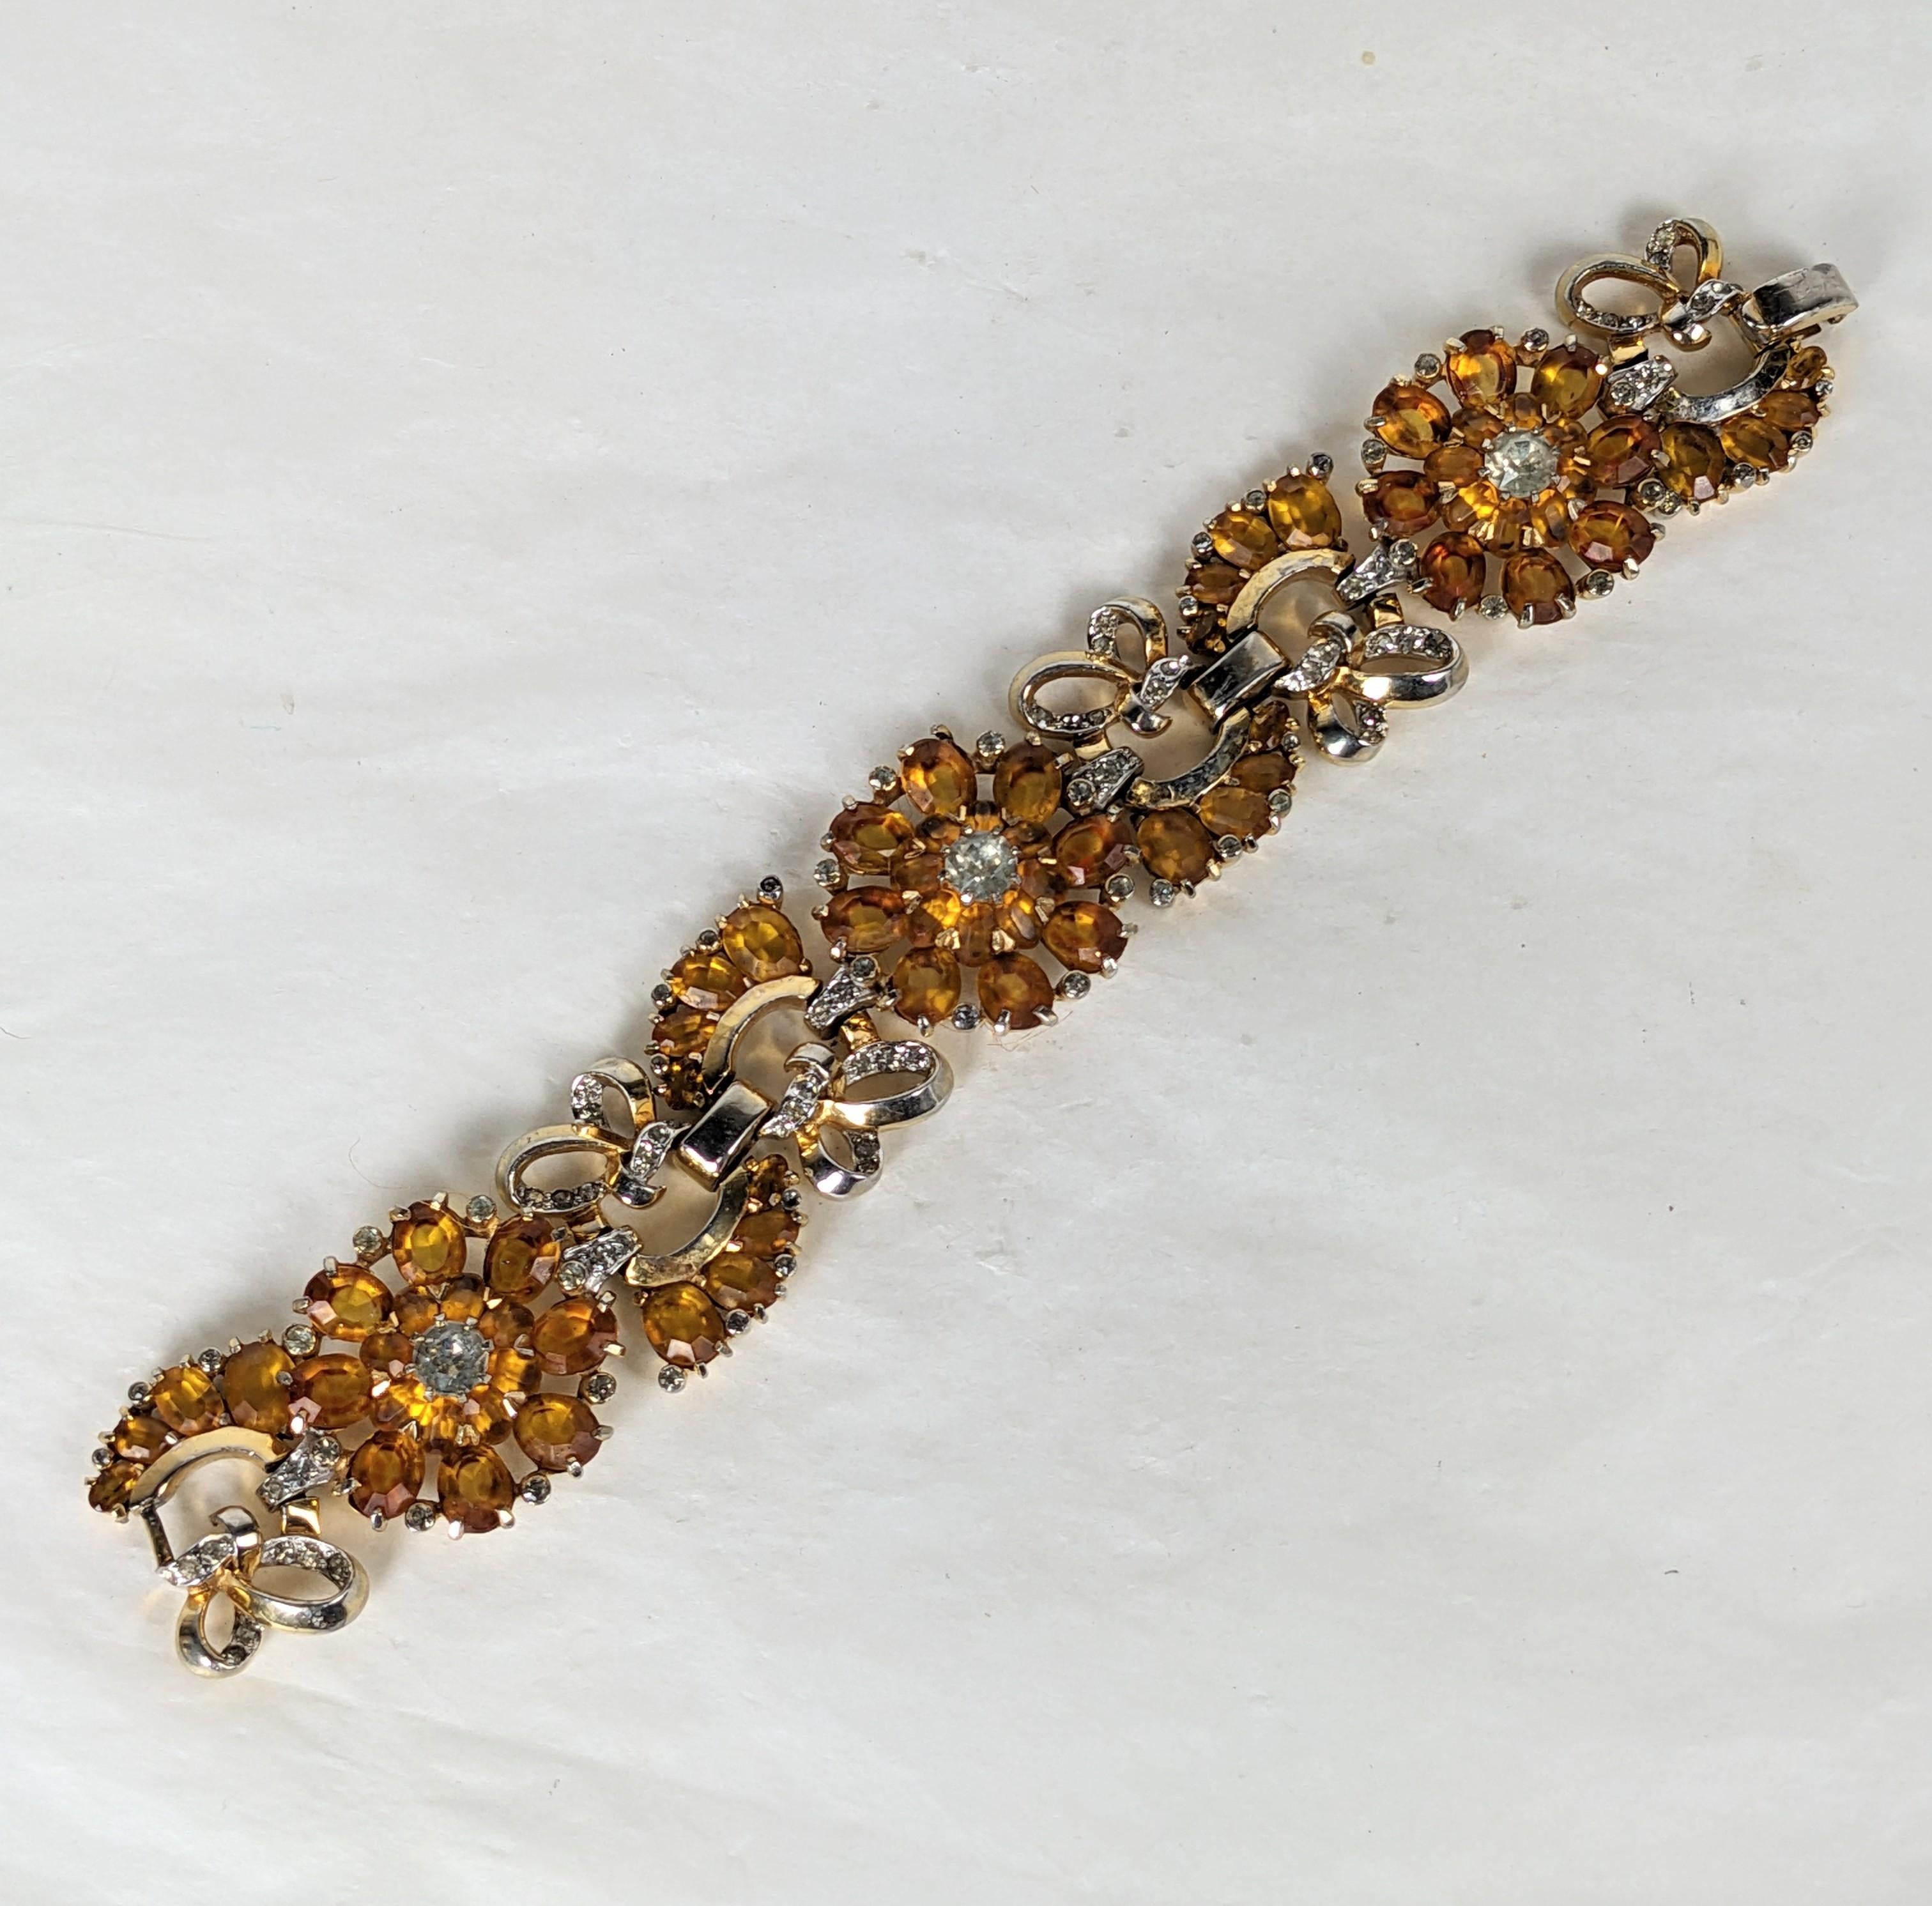 Mazer Topaz and Citrine Flower and Leaf link bracelet. Of rhodium plate and gold plate base metal with crystal rhinestone pave, and vari size topaz and citrine oval faceted stones. 1940's USA.
For similar examples of the flower and leaf motif see